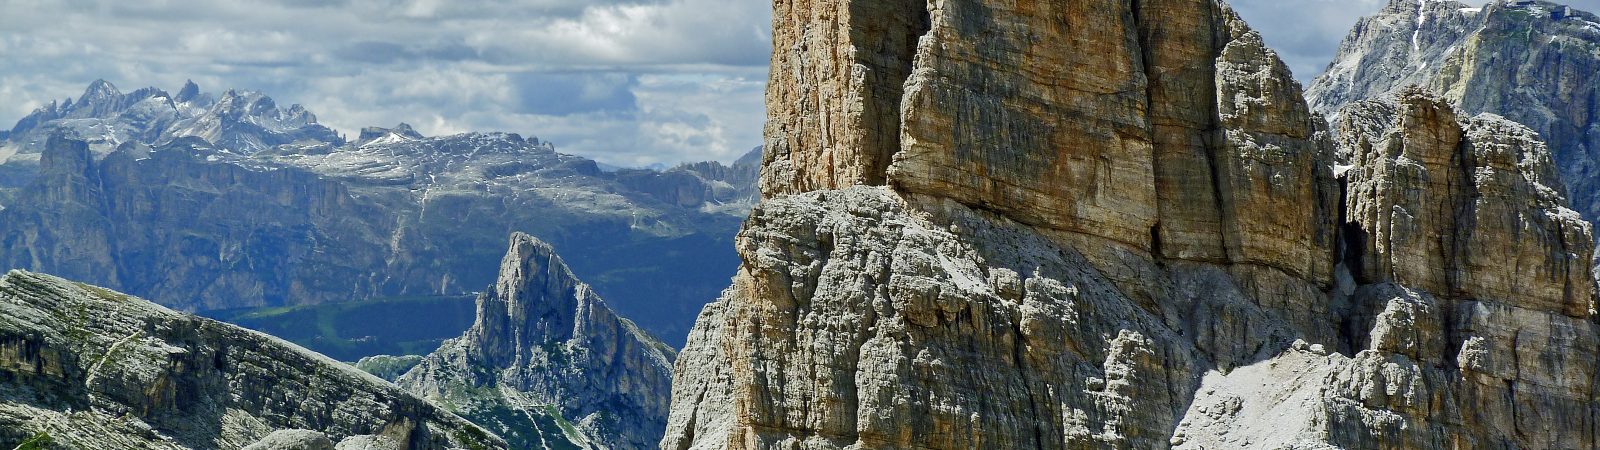 Alpine climbing in the Dolomites, 6 days in the Sella group. 6-day trip ...